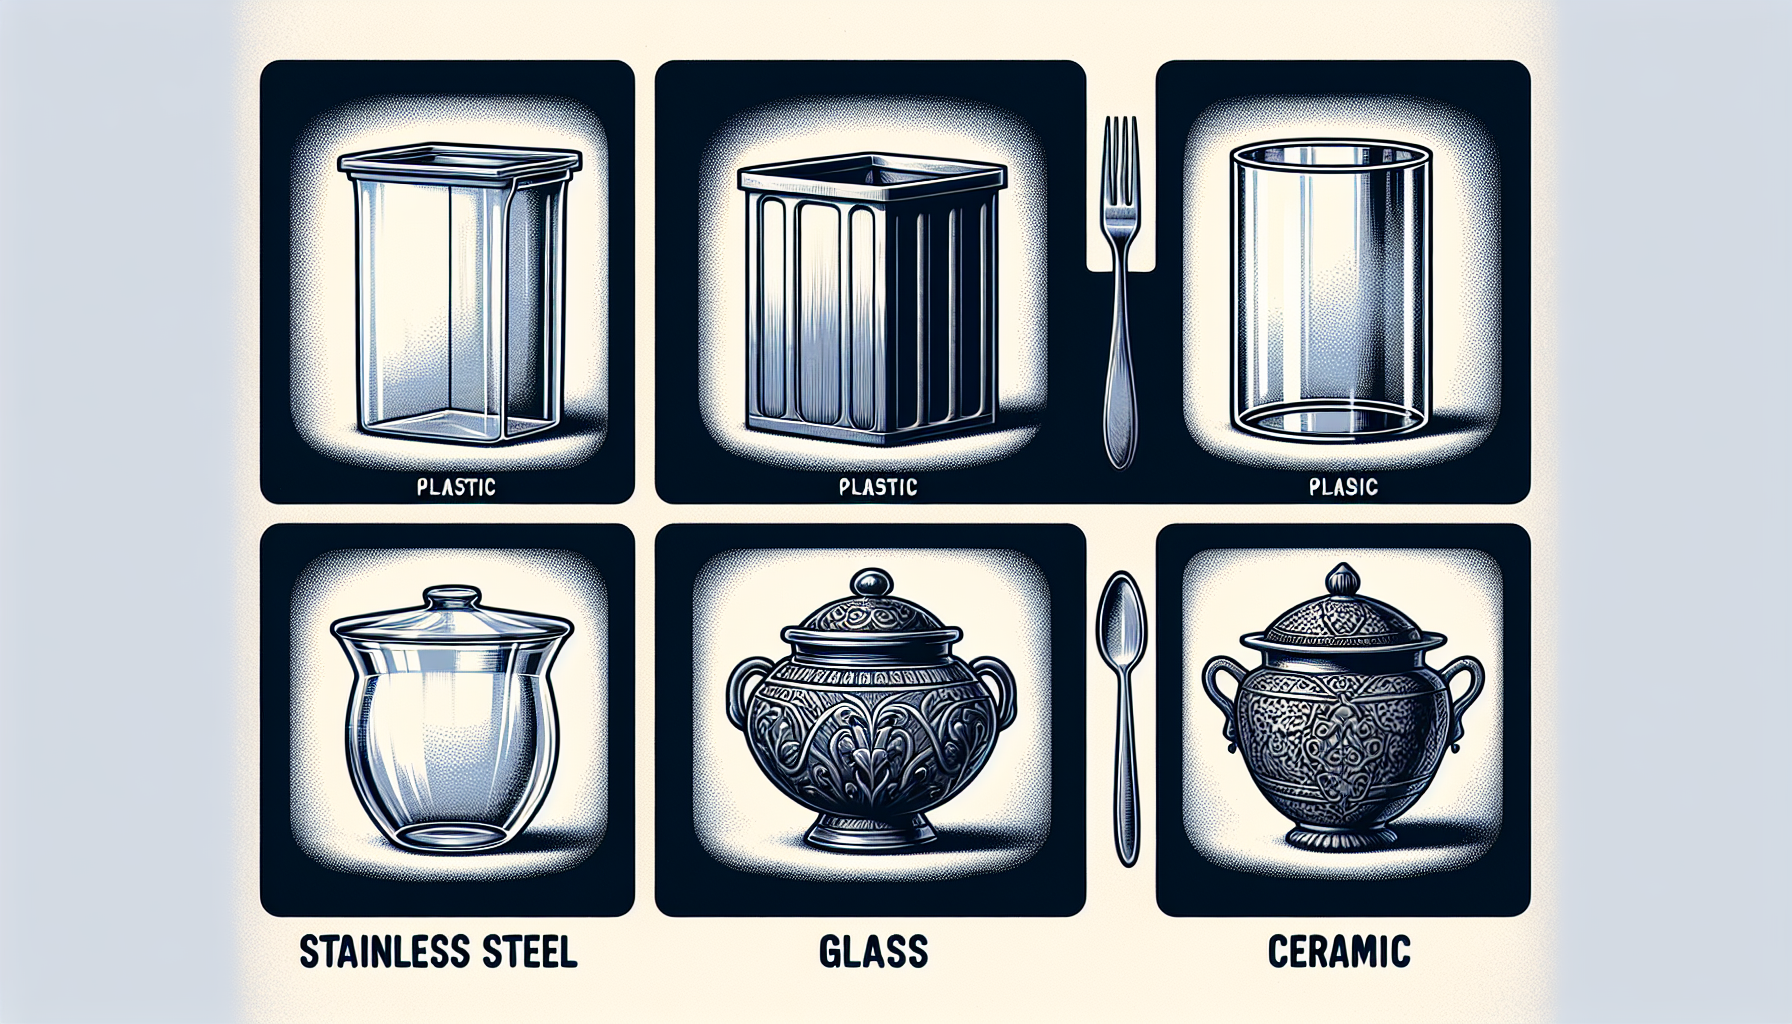 Comparison of stainless steel, plastic, glass, and ceramic containers